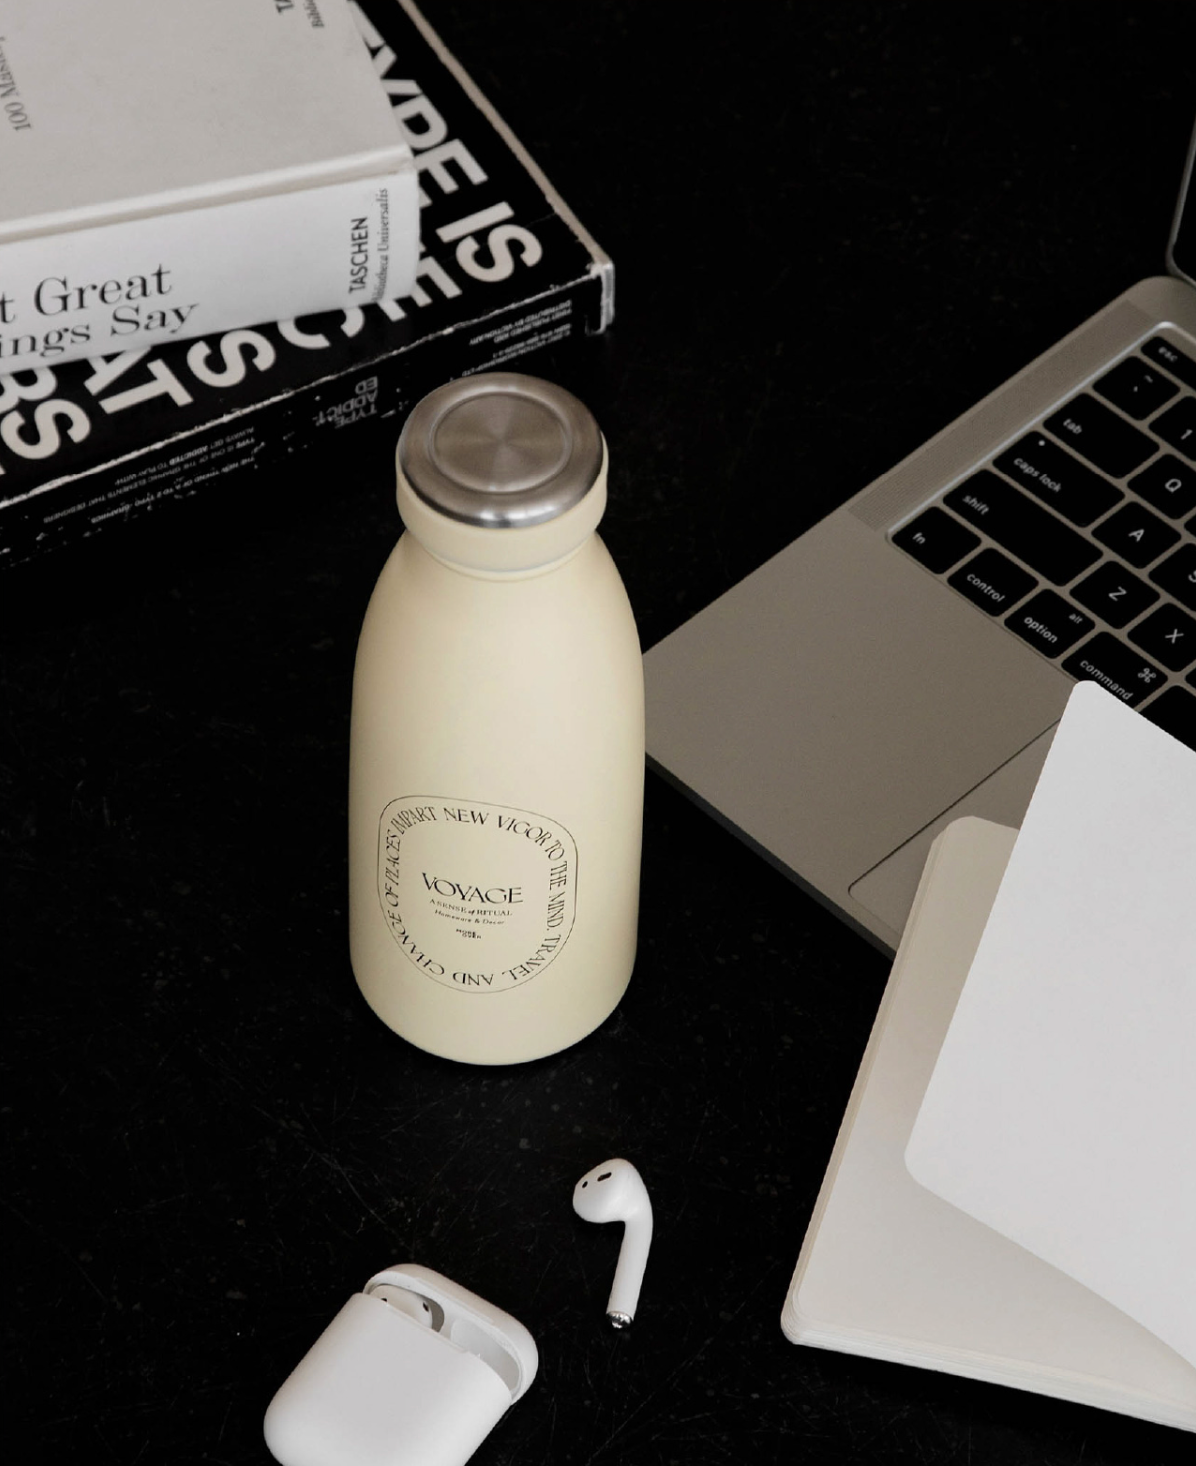 Voyage creamy stainless steel high capacity heat insulating vacuum bottle with beautiful letters on it, by A Bit Sleepy homeware tableware concept store